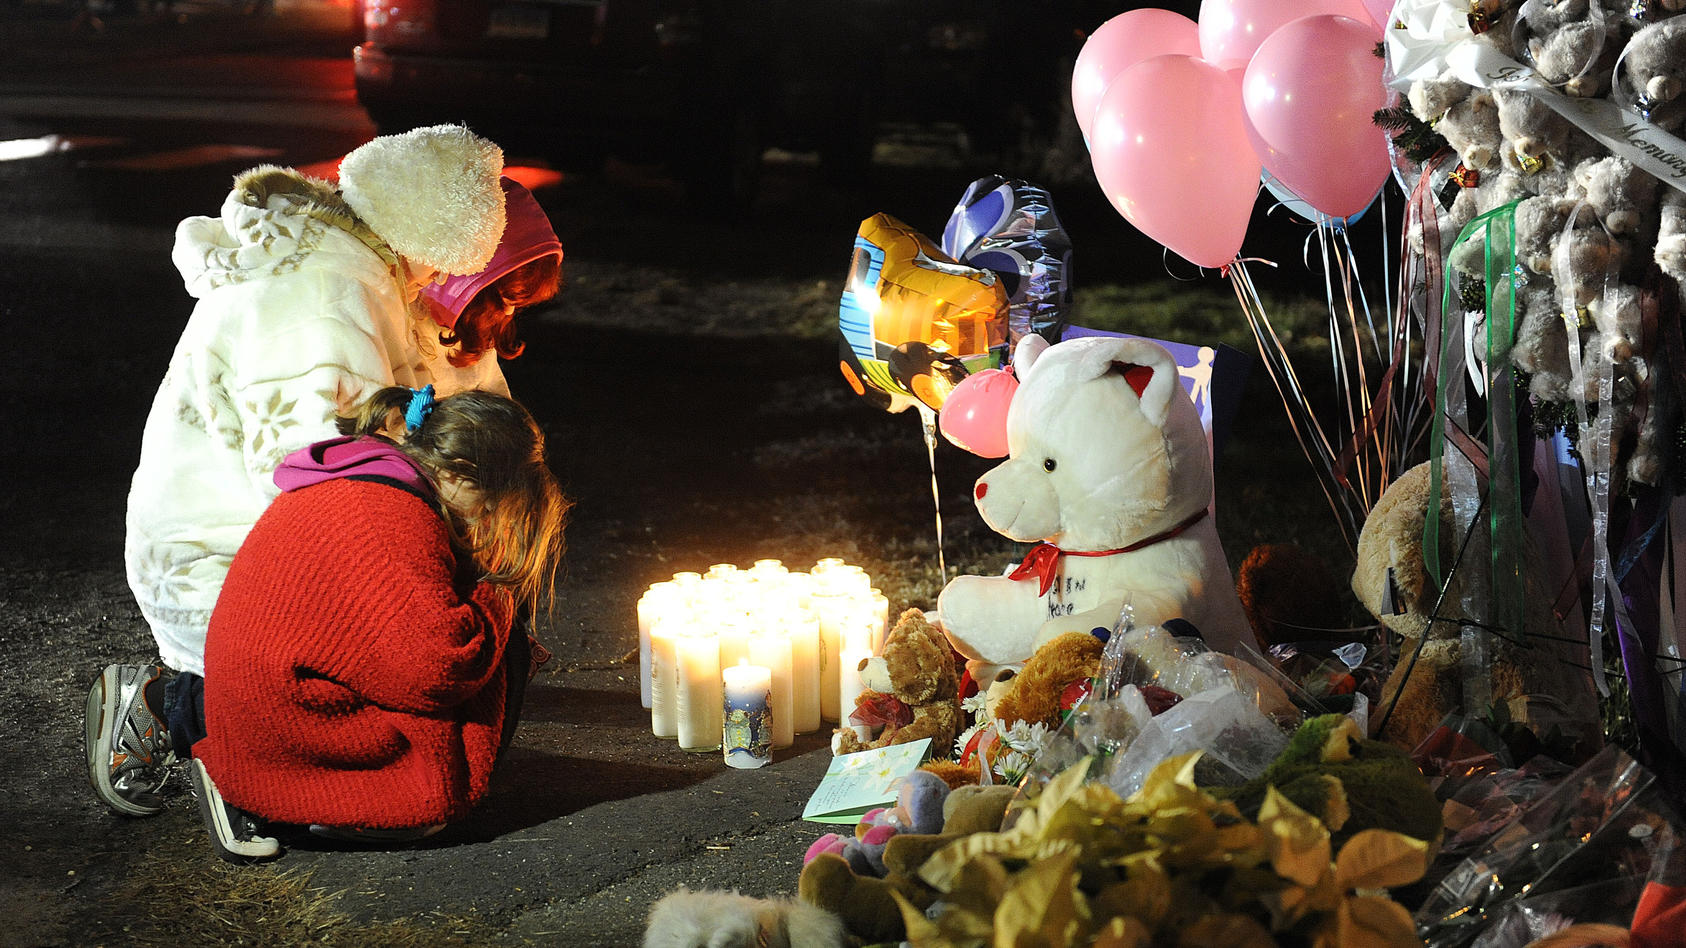 People lights candles at the entrance to the street leading to the Sandy Hook Elementary School on December 15, 2012 in Newtown, Connecticut. Twenty six people were shot dead, including twenty children, after a gunman identified as Adam Lanza opened 